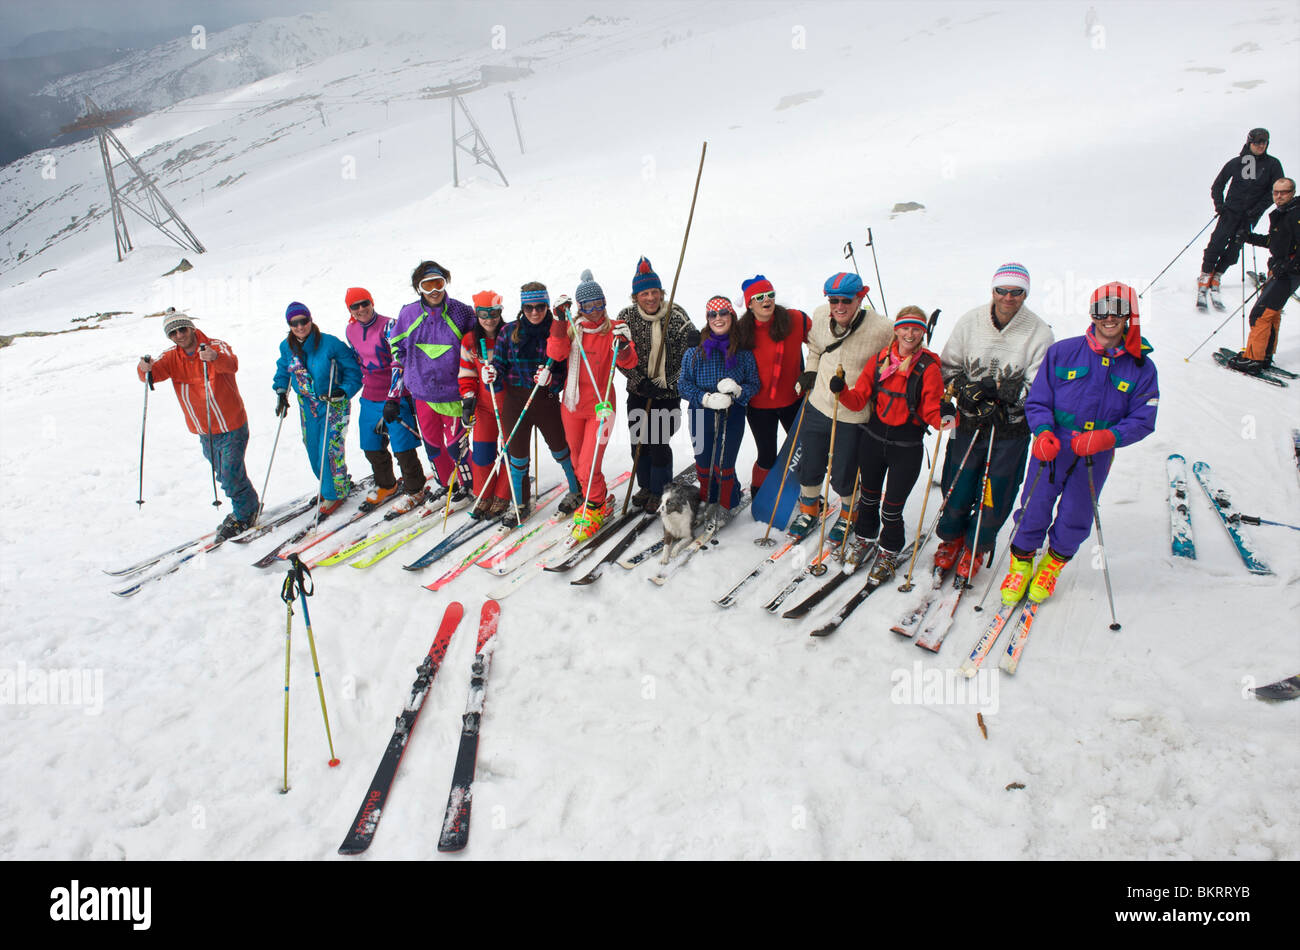 Slovakia, Jasna, group of instructors dressed up to the eighties celebrating the end of the season Stock Photo